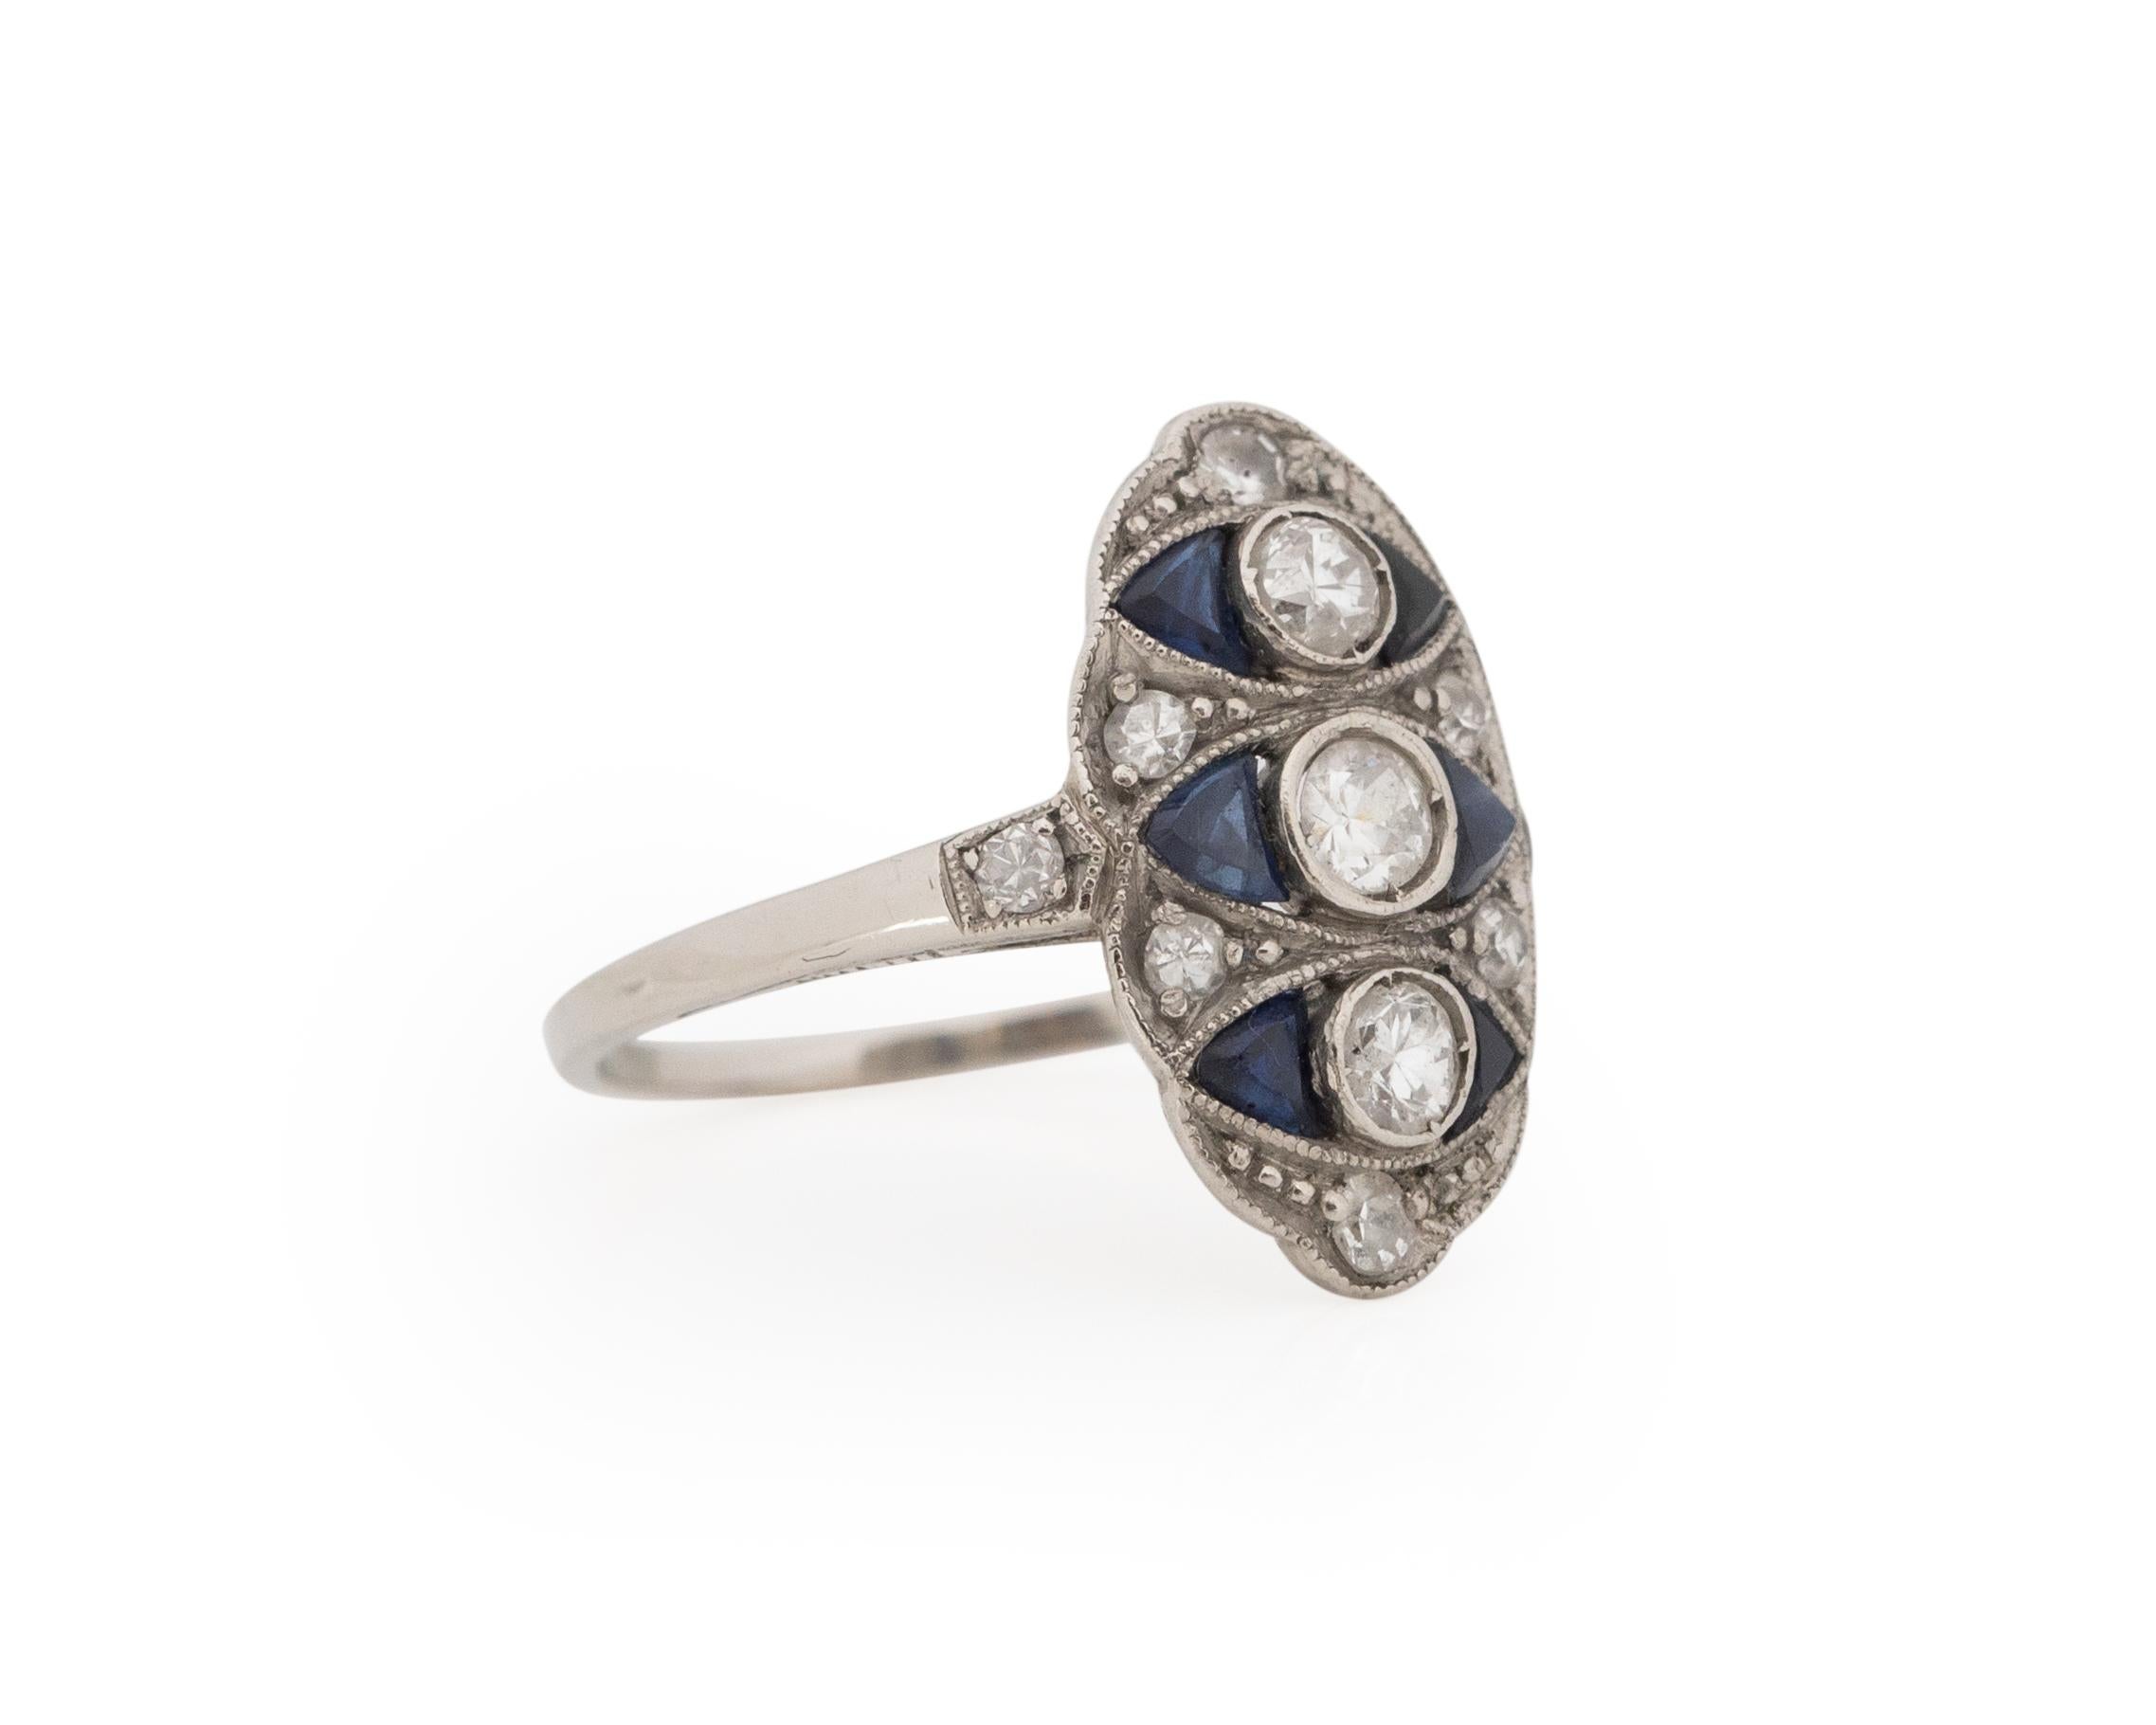 Ring Size: 3
Metal Type: Platinum [Hallmarked, and Tested]
Weight: 2.0 grams

Diamond Details:
Weight: .25carat, total
Cut: Old European brilliant
Color: G-H
Clarity: SI

Side Stone Details:
Type: Sapphire, Created
Weight: .45carat, total
Color: